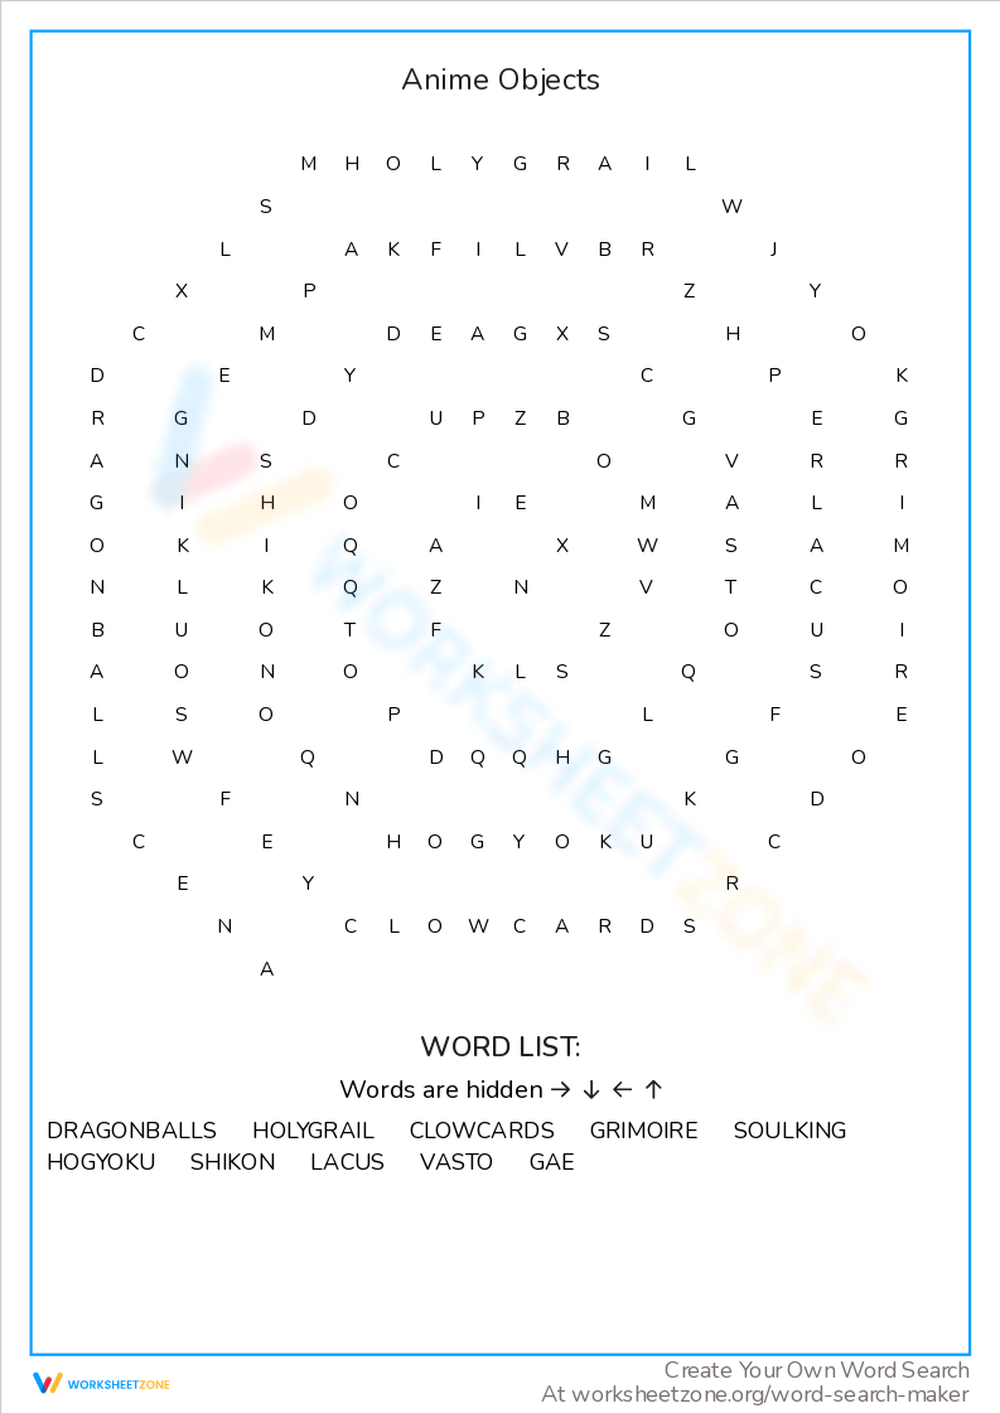 Anime Crossword Puzzles - Page 8